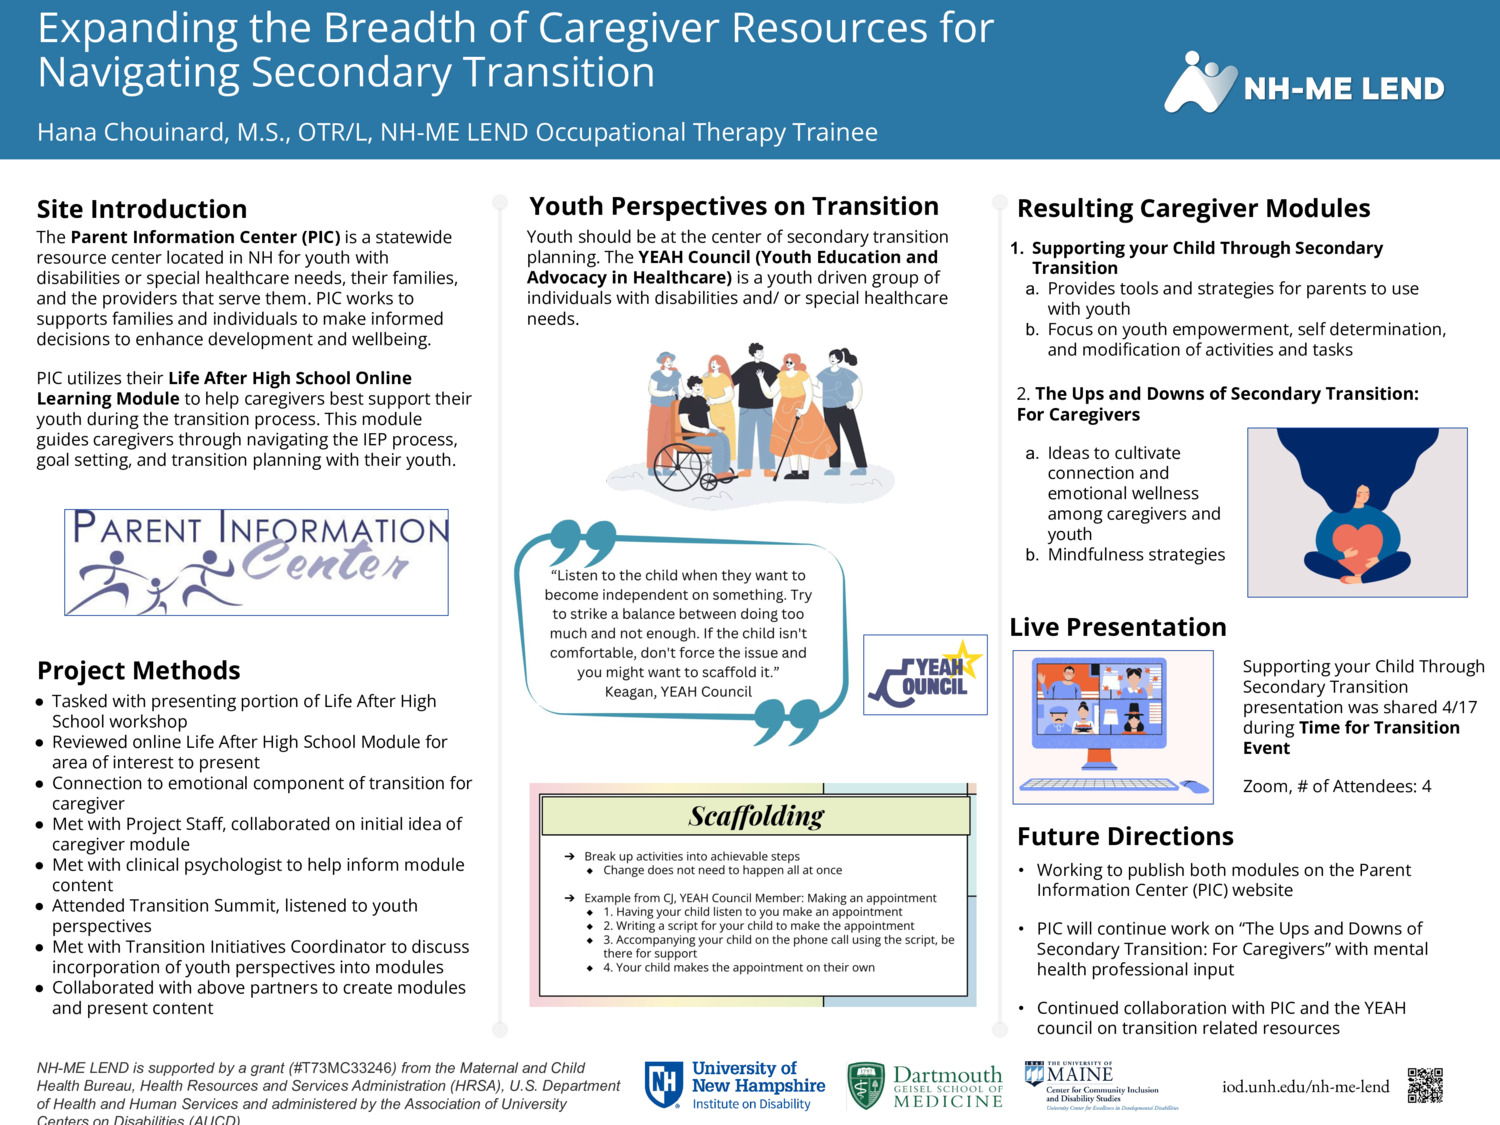 Expanding The Breadth Of Caregiver Resources For Navigating Secondary Transition by hchouinard